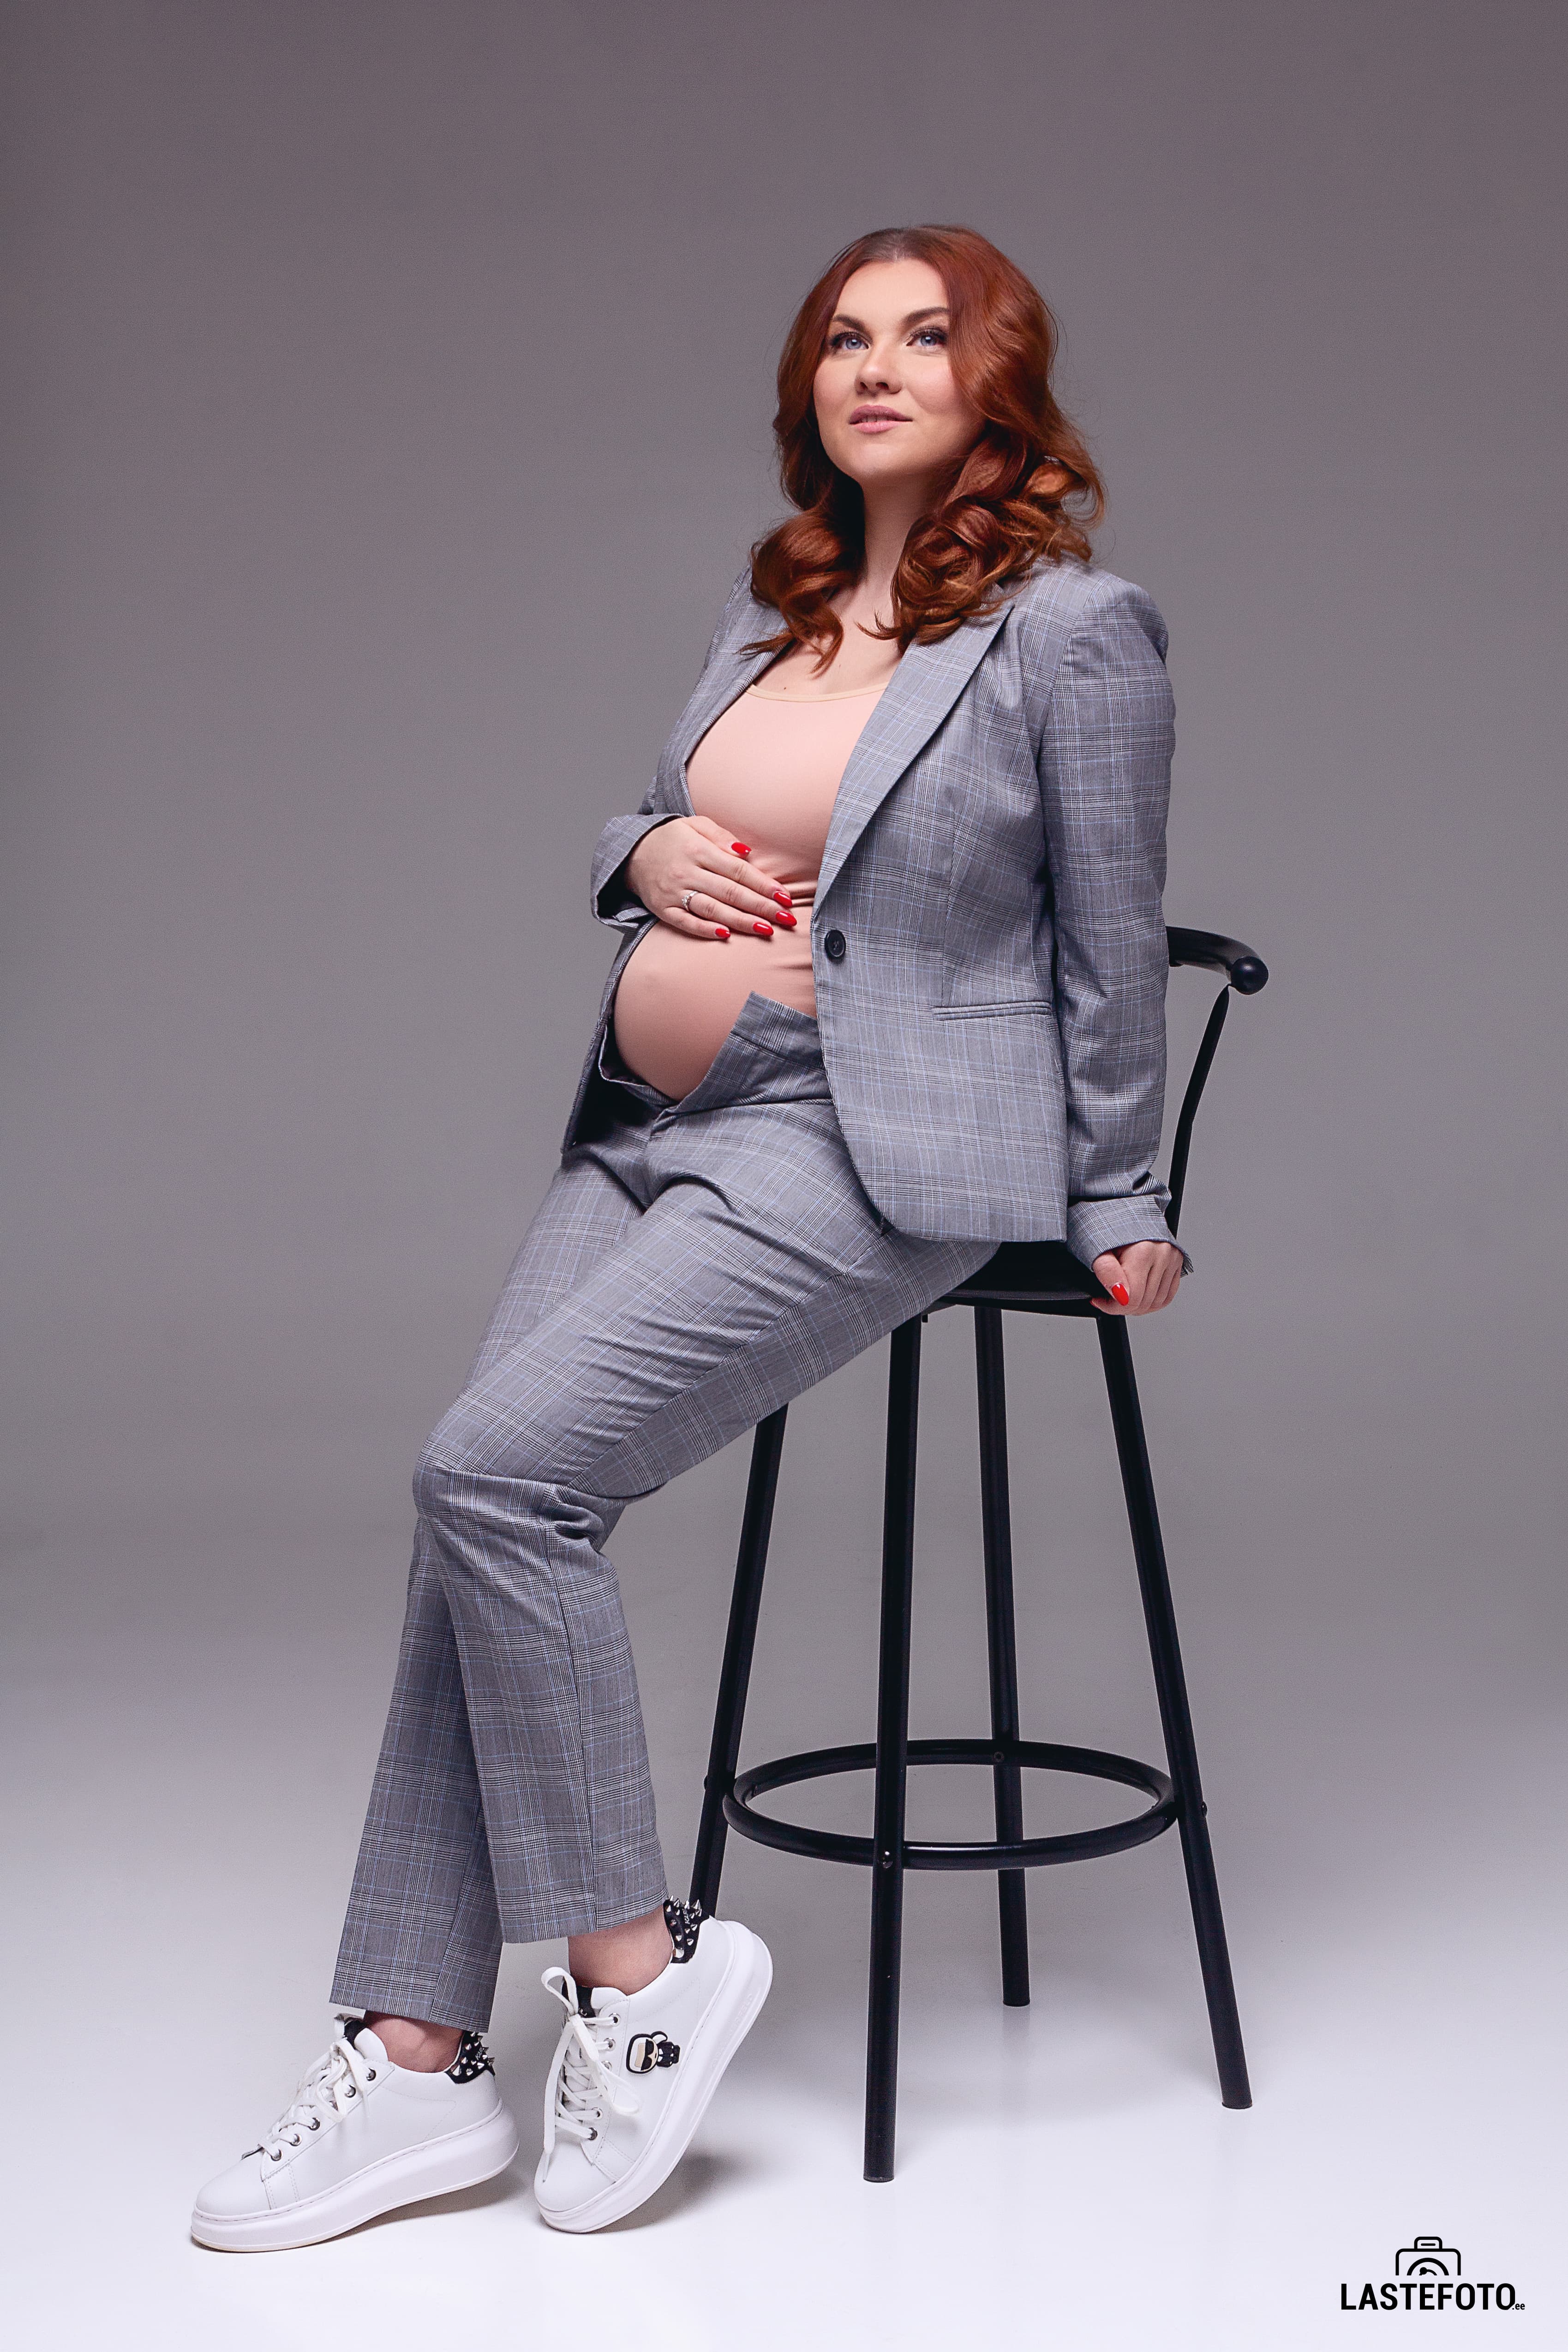 Maternity photoshoot in the style of Vogue in Tallinn